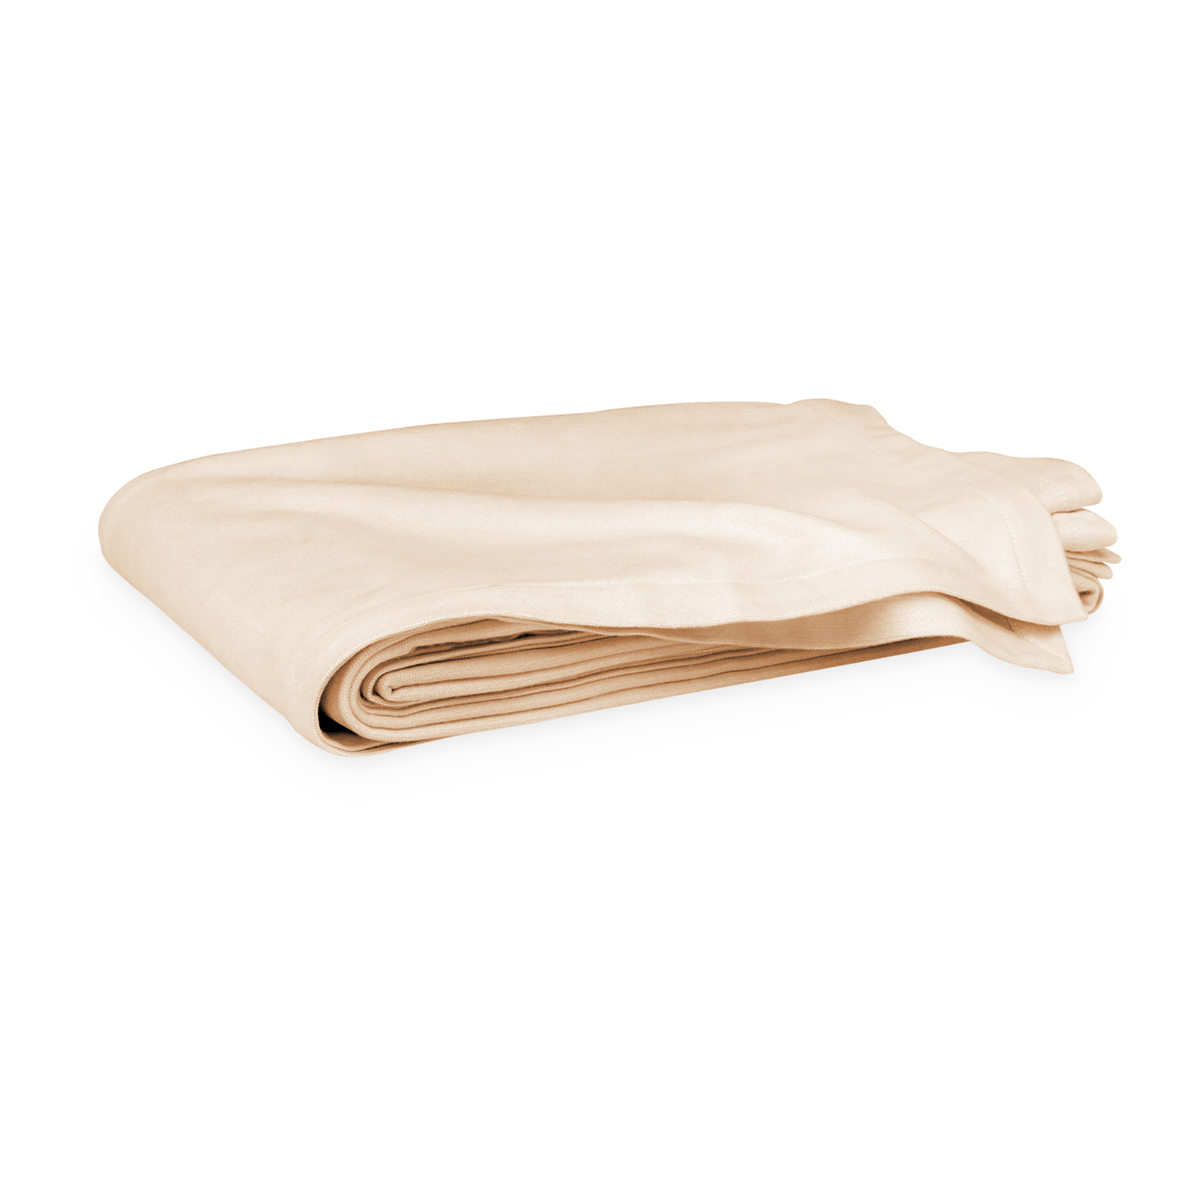 Folded Blanket of Matouk Dream Modal Collection in Champagne Color